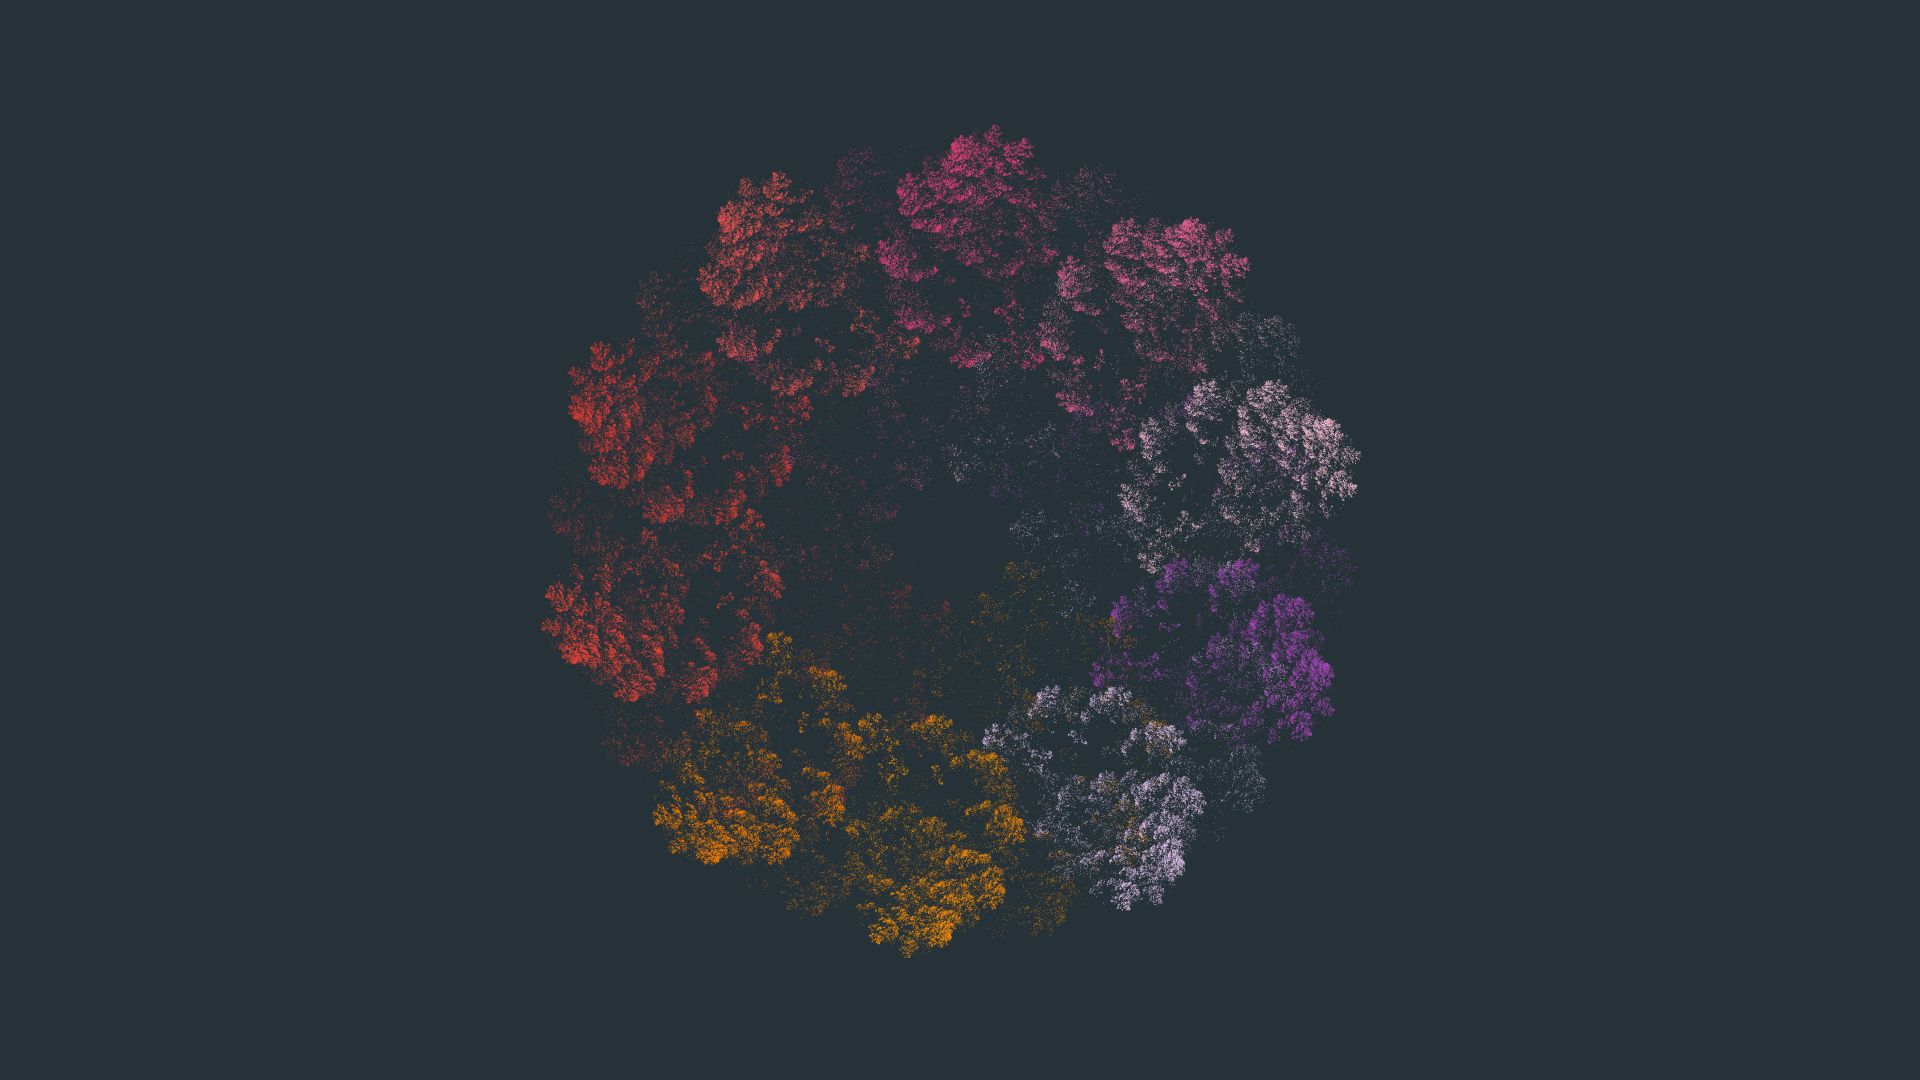 A colorful, abstract image of a ball of trees on a black background - Math